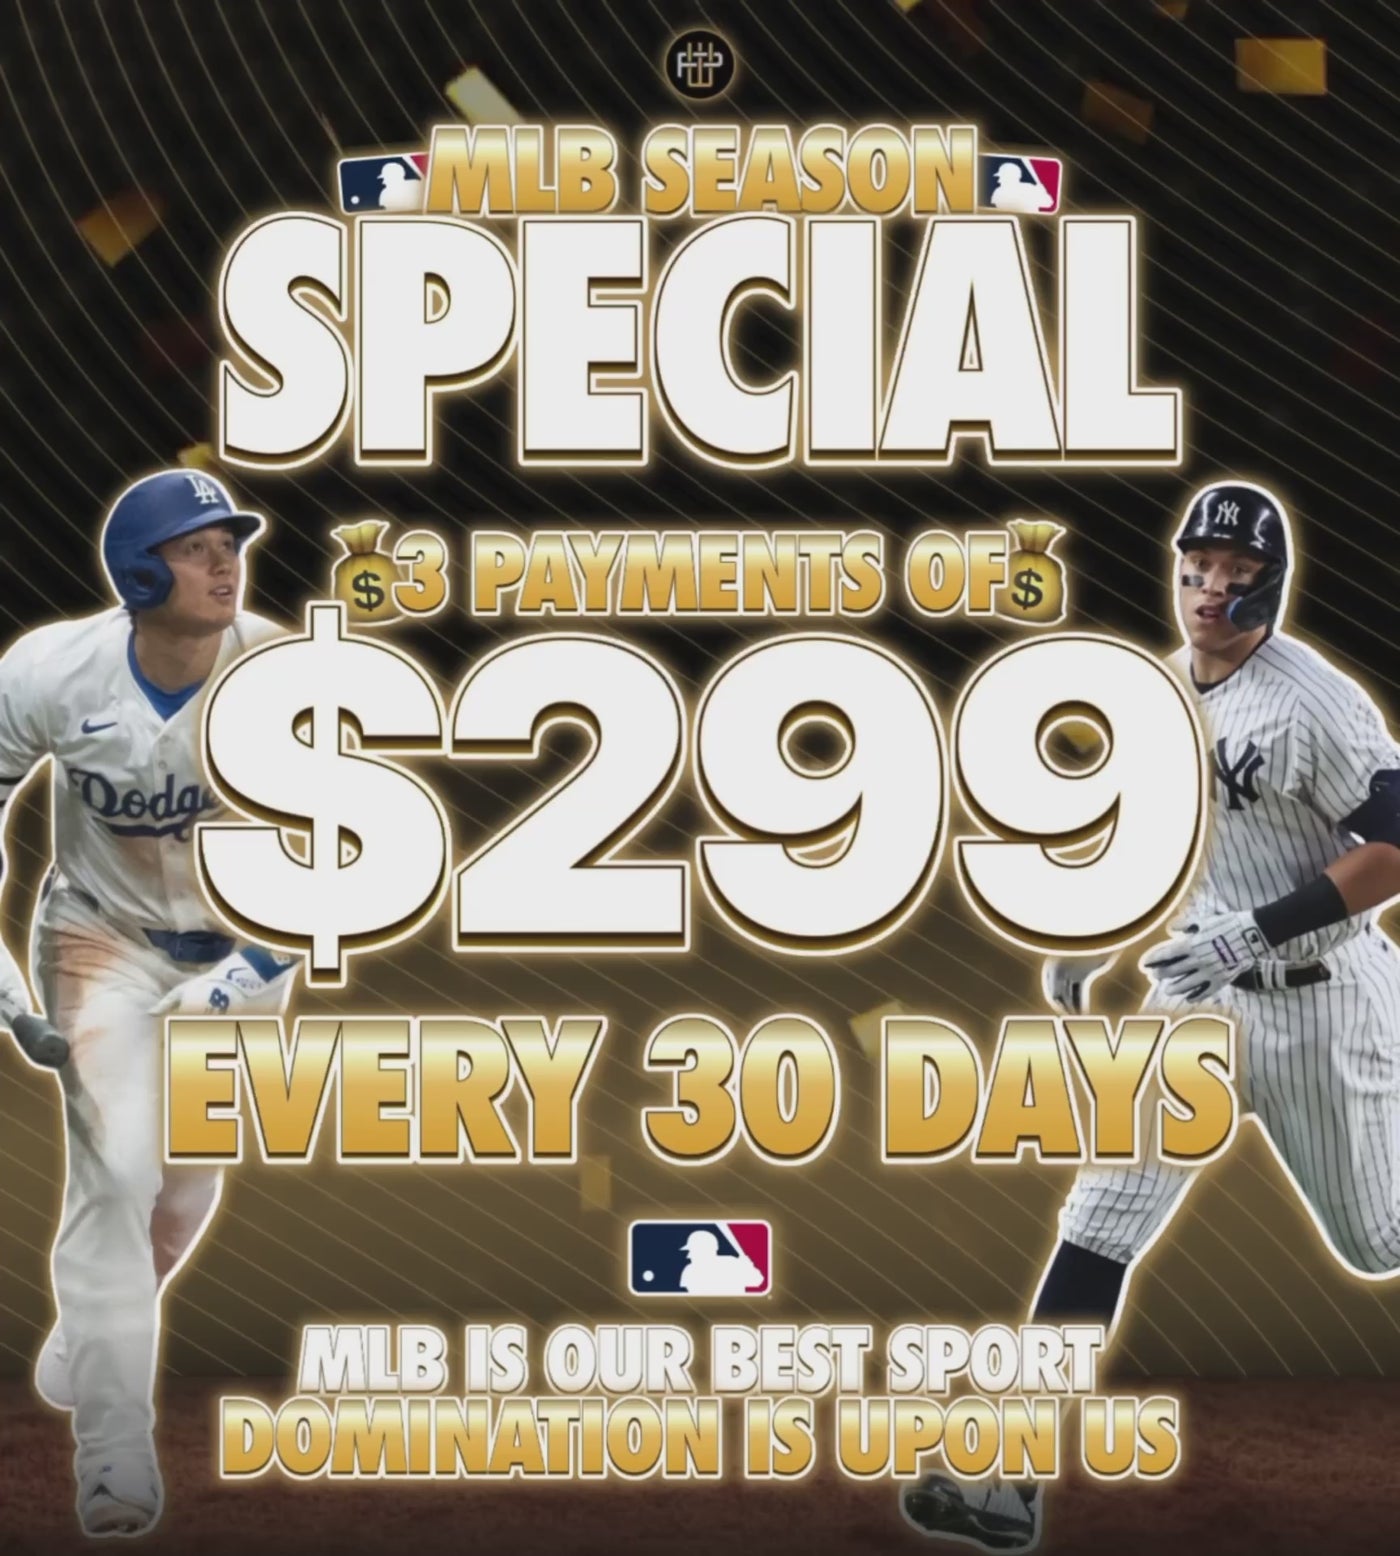 MLB SEASON SPECIAL - PAYMENT PLAN